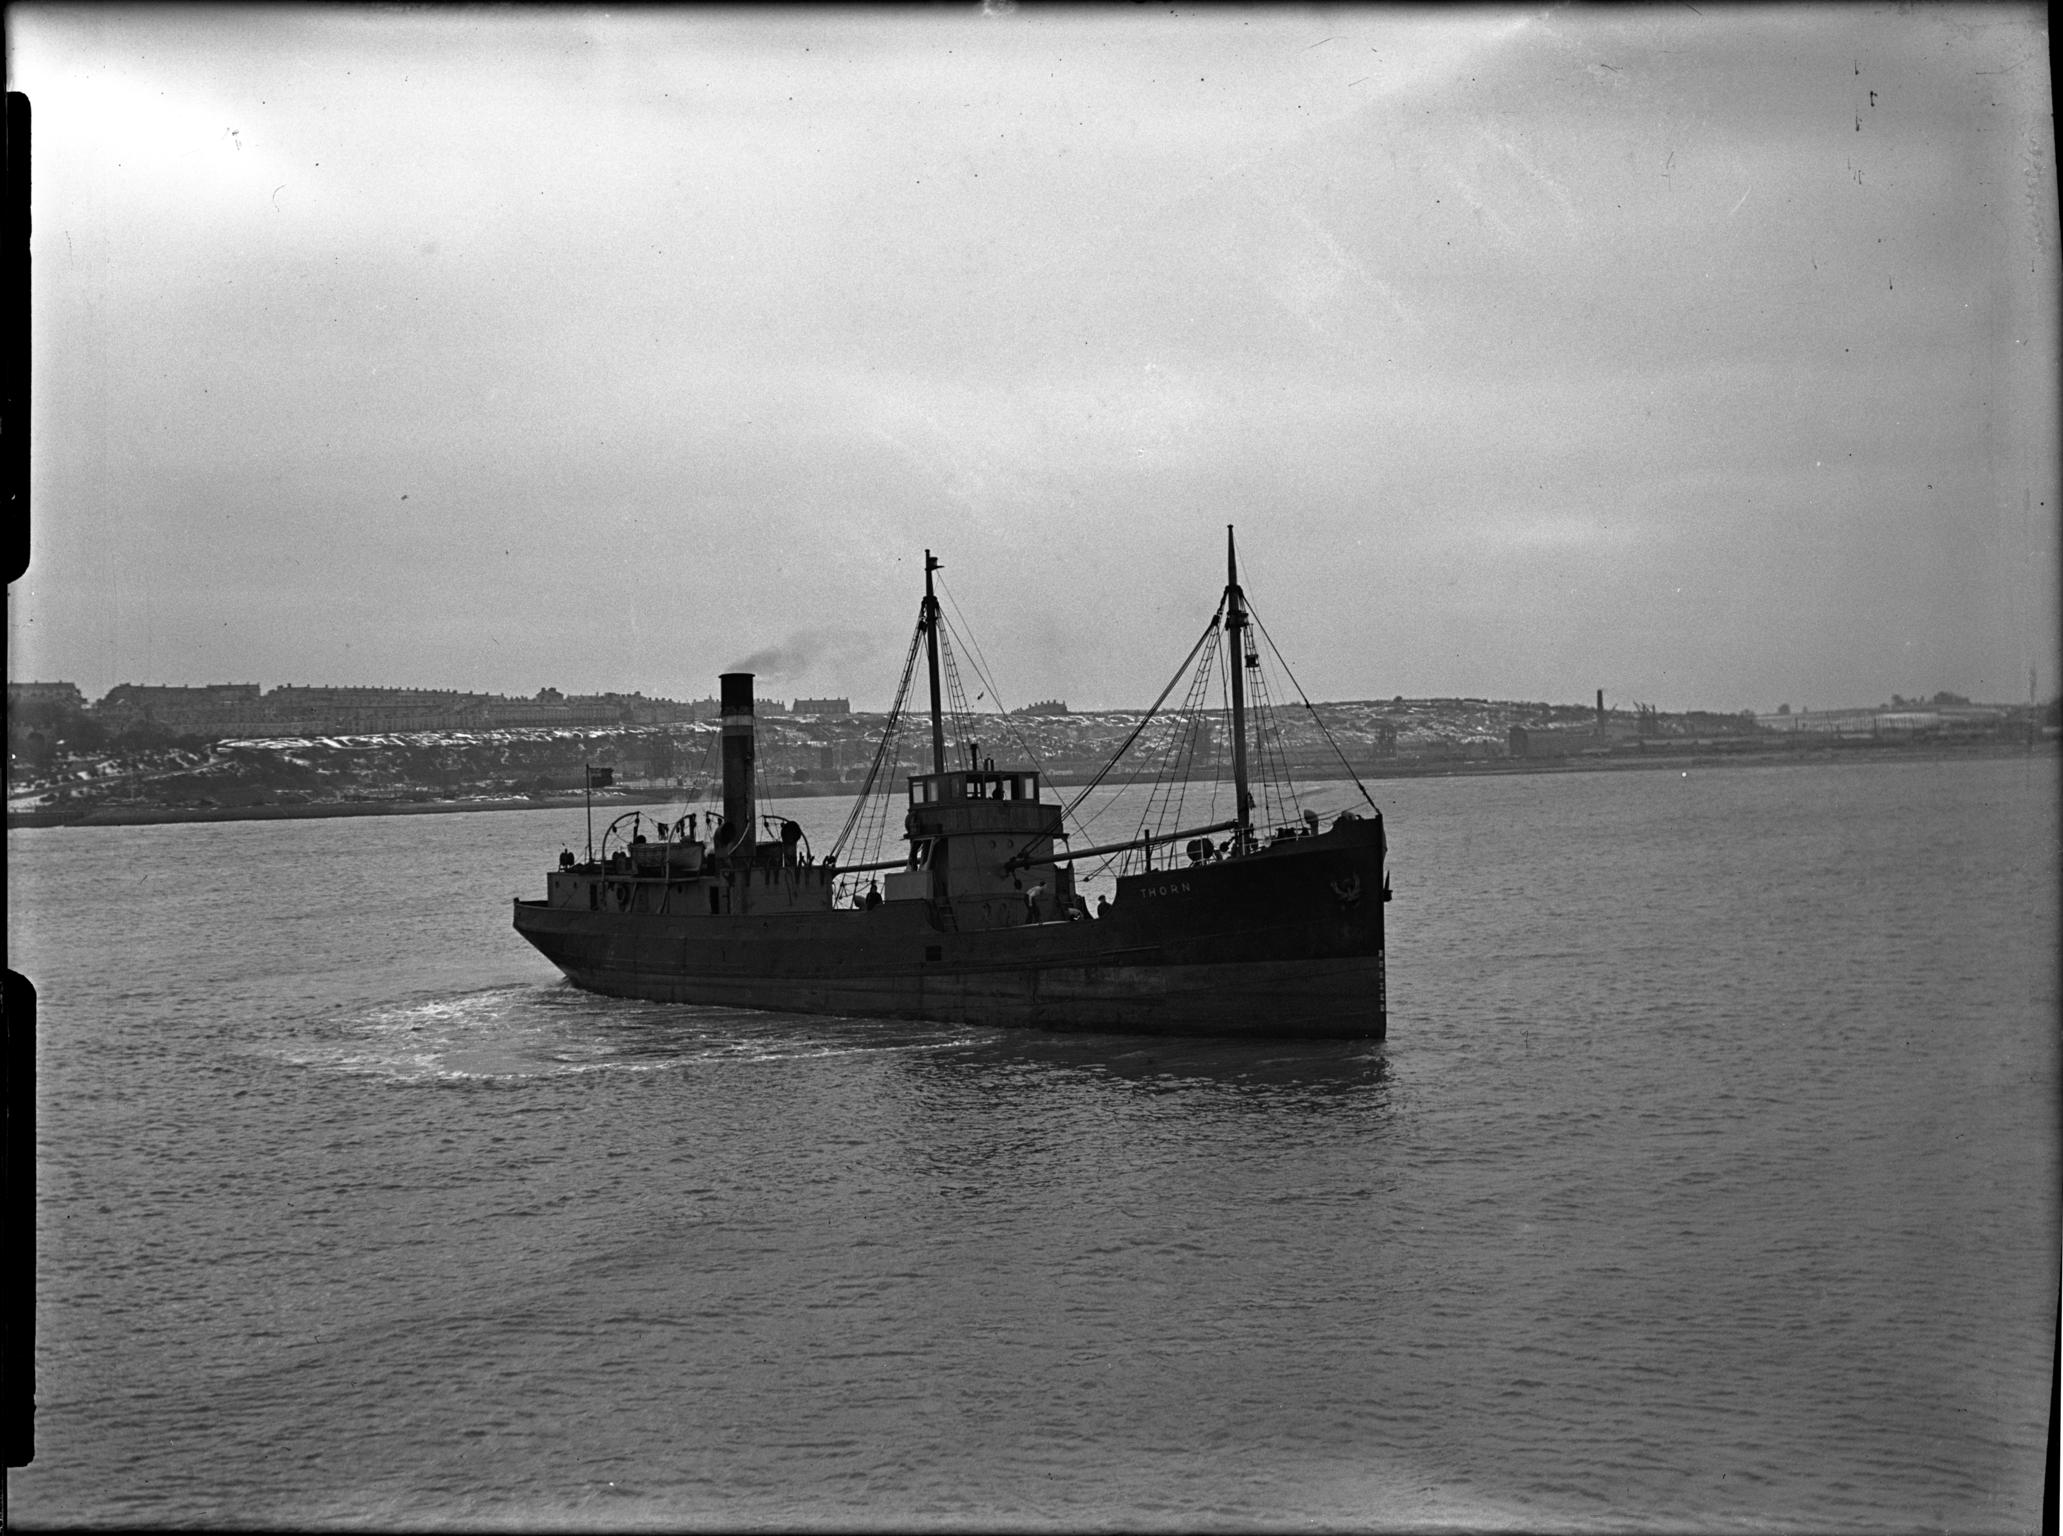 S.S. THORN, glass negative